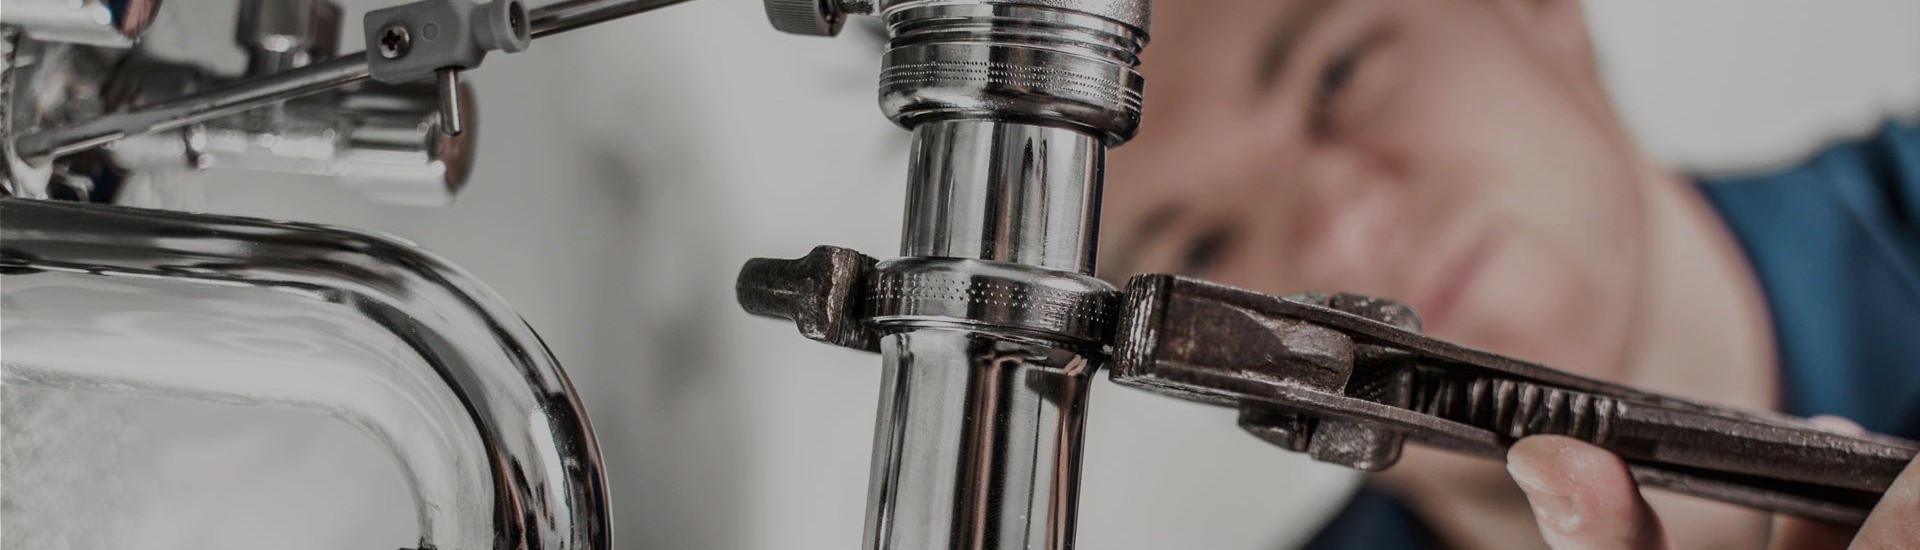 How to Eliminate Plumbing Problems Easily